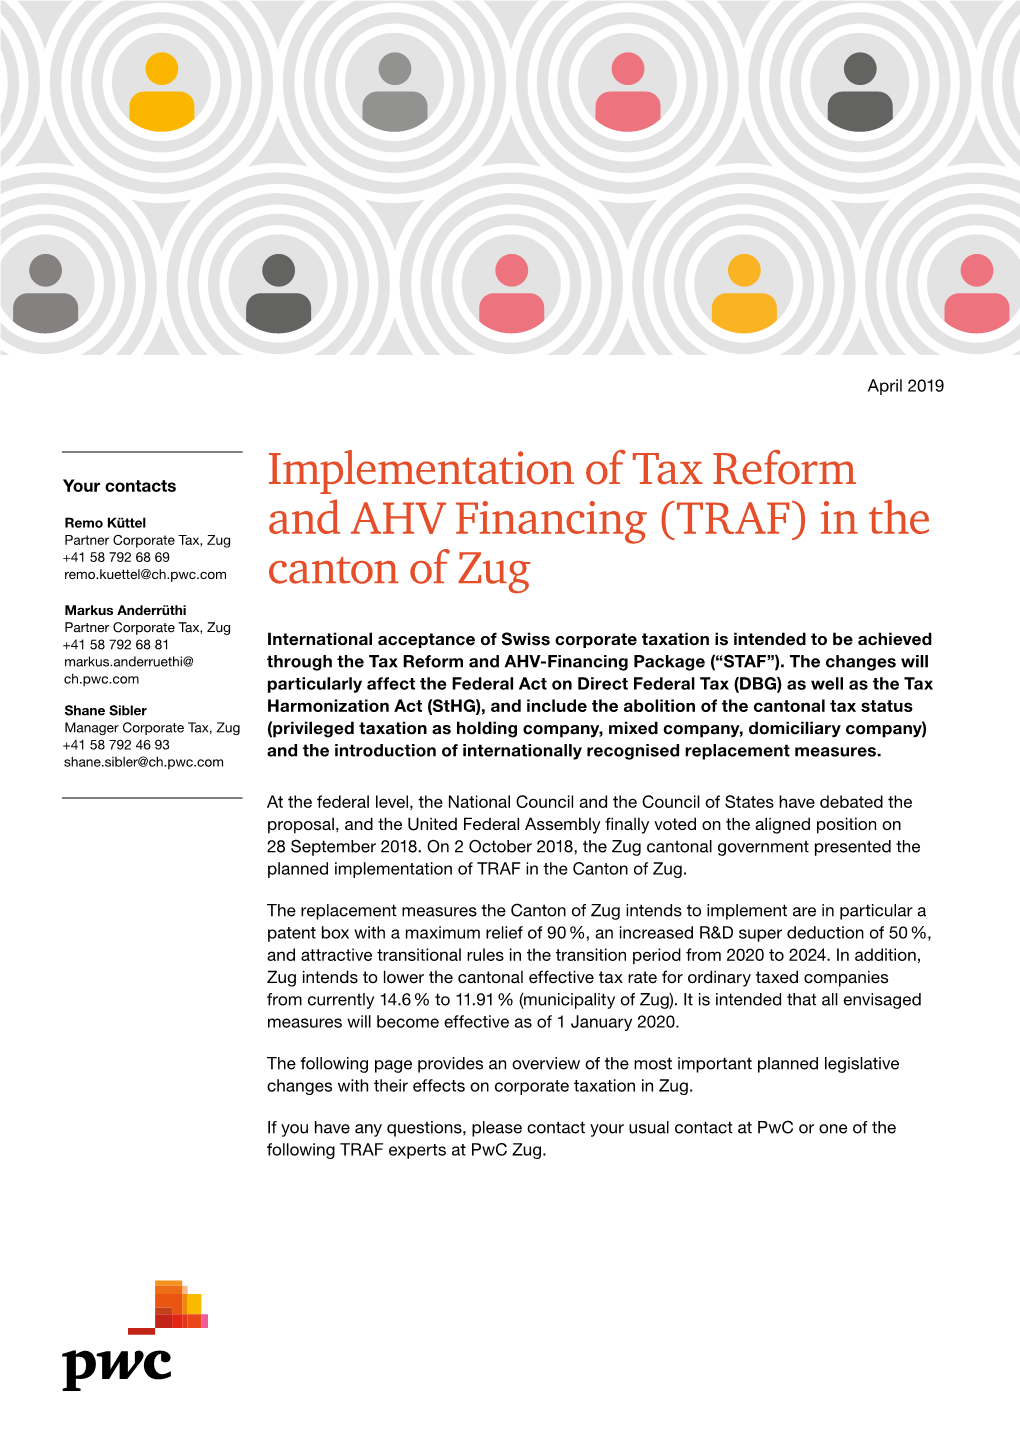 Implementation of Tax Reform and AHV Financing (TRAF)